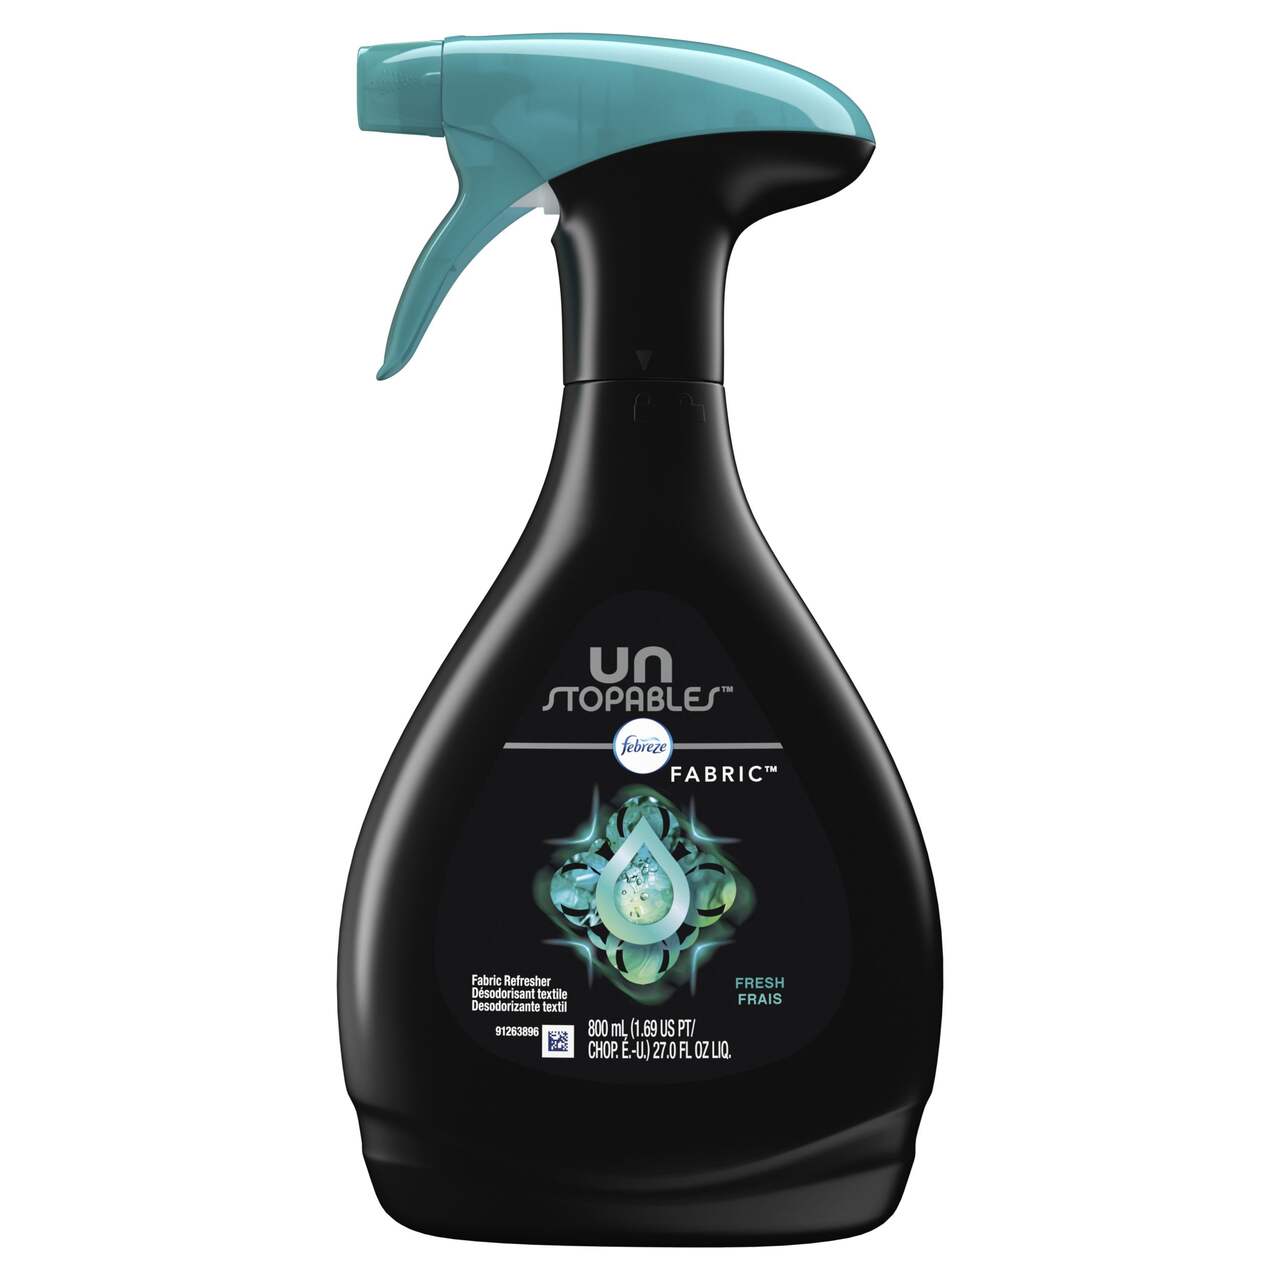 https://media-www.canadiantire.ca/product/living/home-essentials/laundry-hand-dish-cleaning-solutions/1530102/febreze-unstoppables-fabric-refresher-fresh-800ml-b2d32d85-de20-4fb3-8e7e-0121397b504c-jpgrendition.jpg?imdensity=1&imwidth=640&impolicy=mZoom